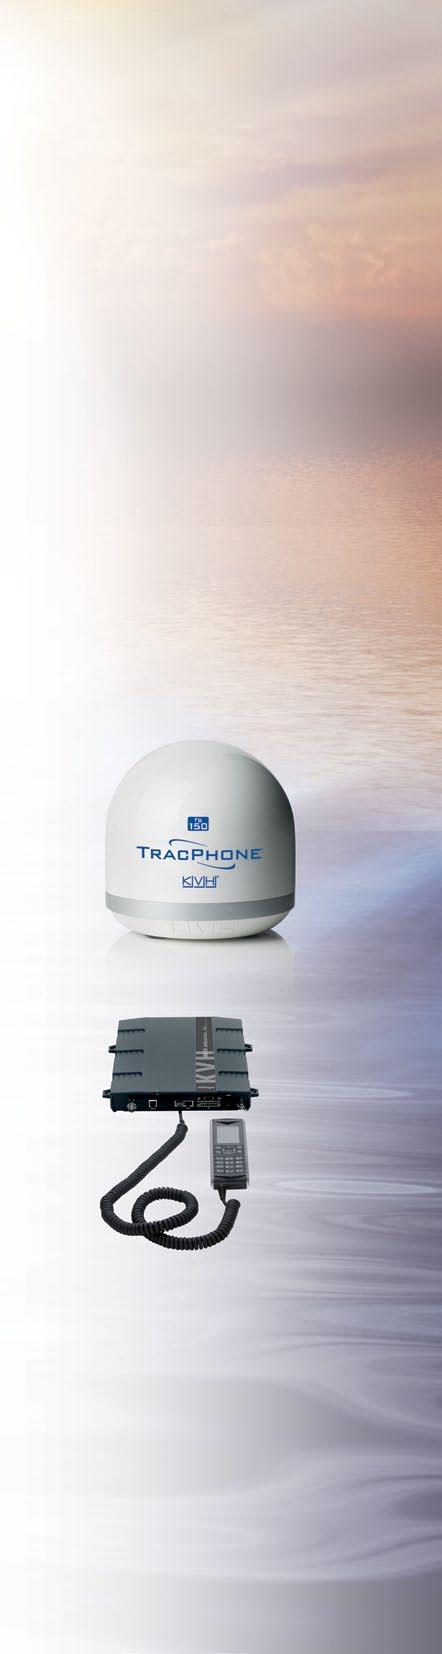 KVH TracPhone FB150 the newest in fast, reliable, small & affordable maritime satellite communications With KVH s new ultra-compact satellite communications system the new TracPhone FB150 even small